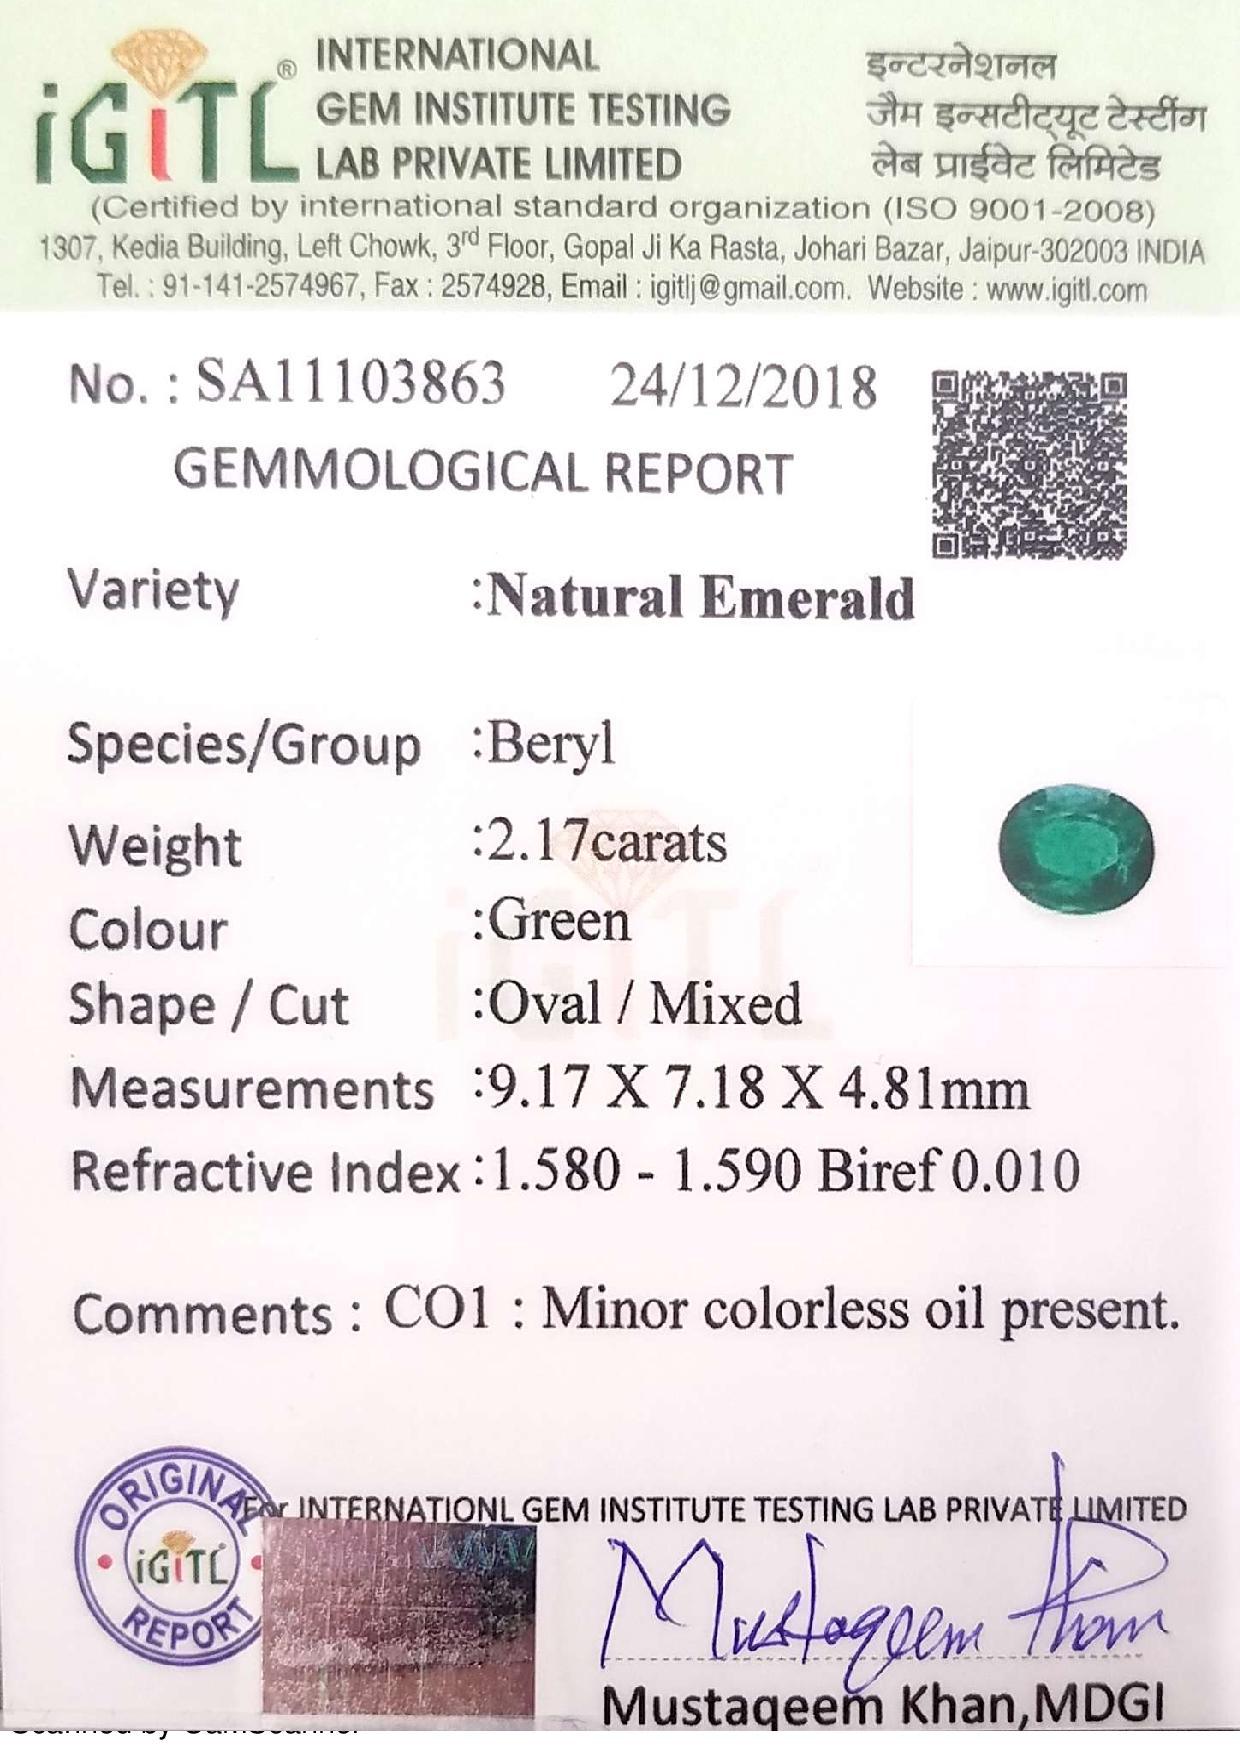 Oval Cut 2.22 Ct Weight Oval Shaped Green Color IGITL Certified Emerald Gemstone Pendant For Sale